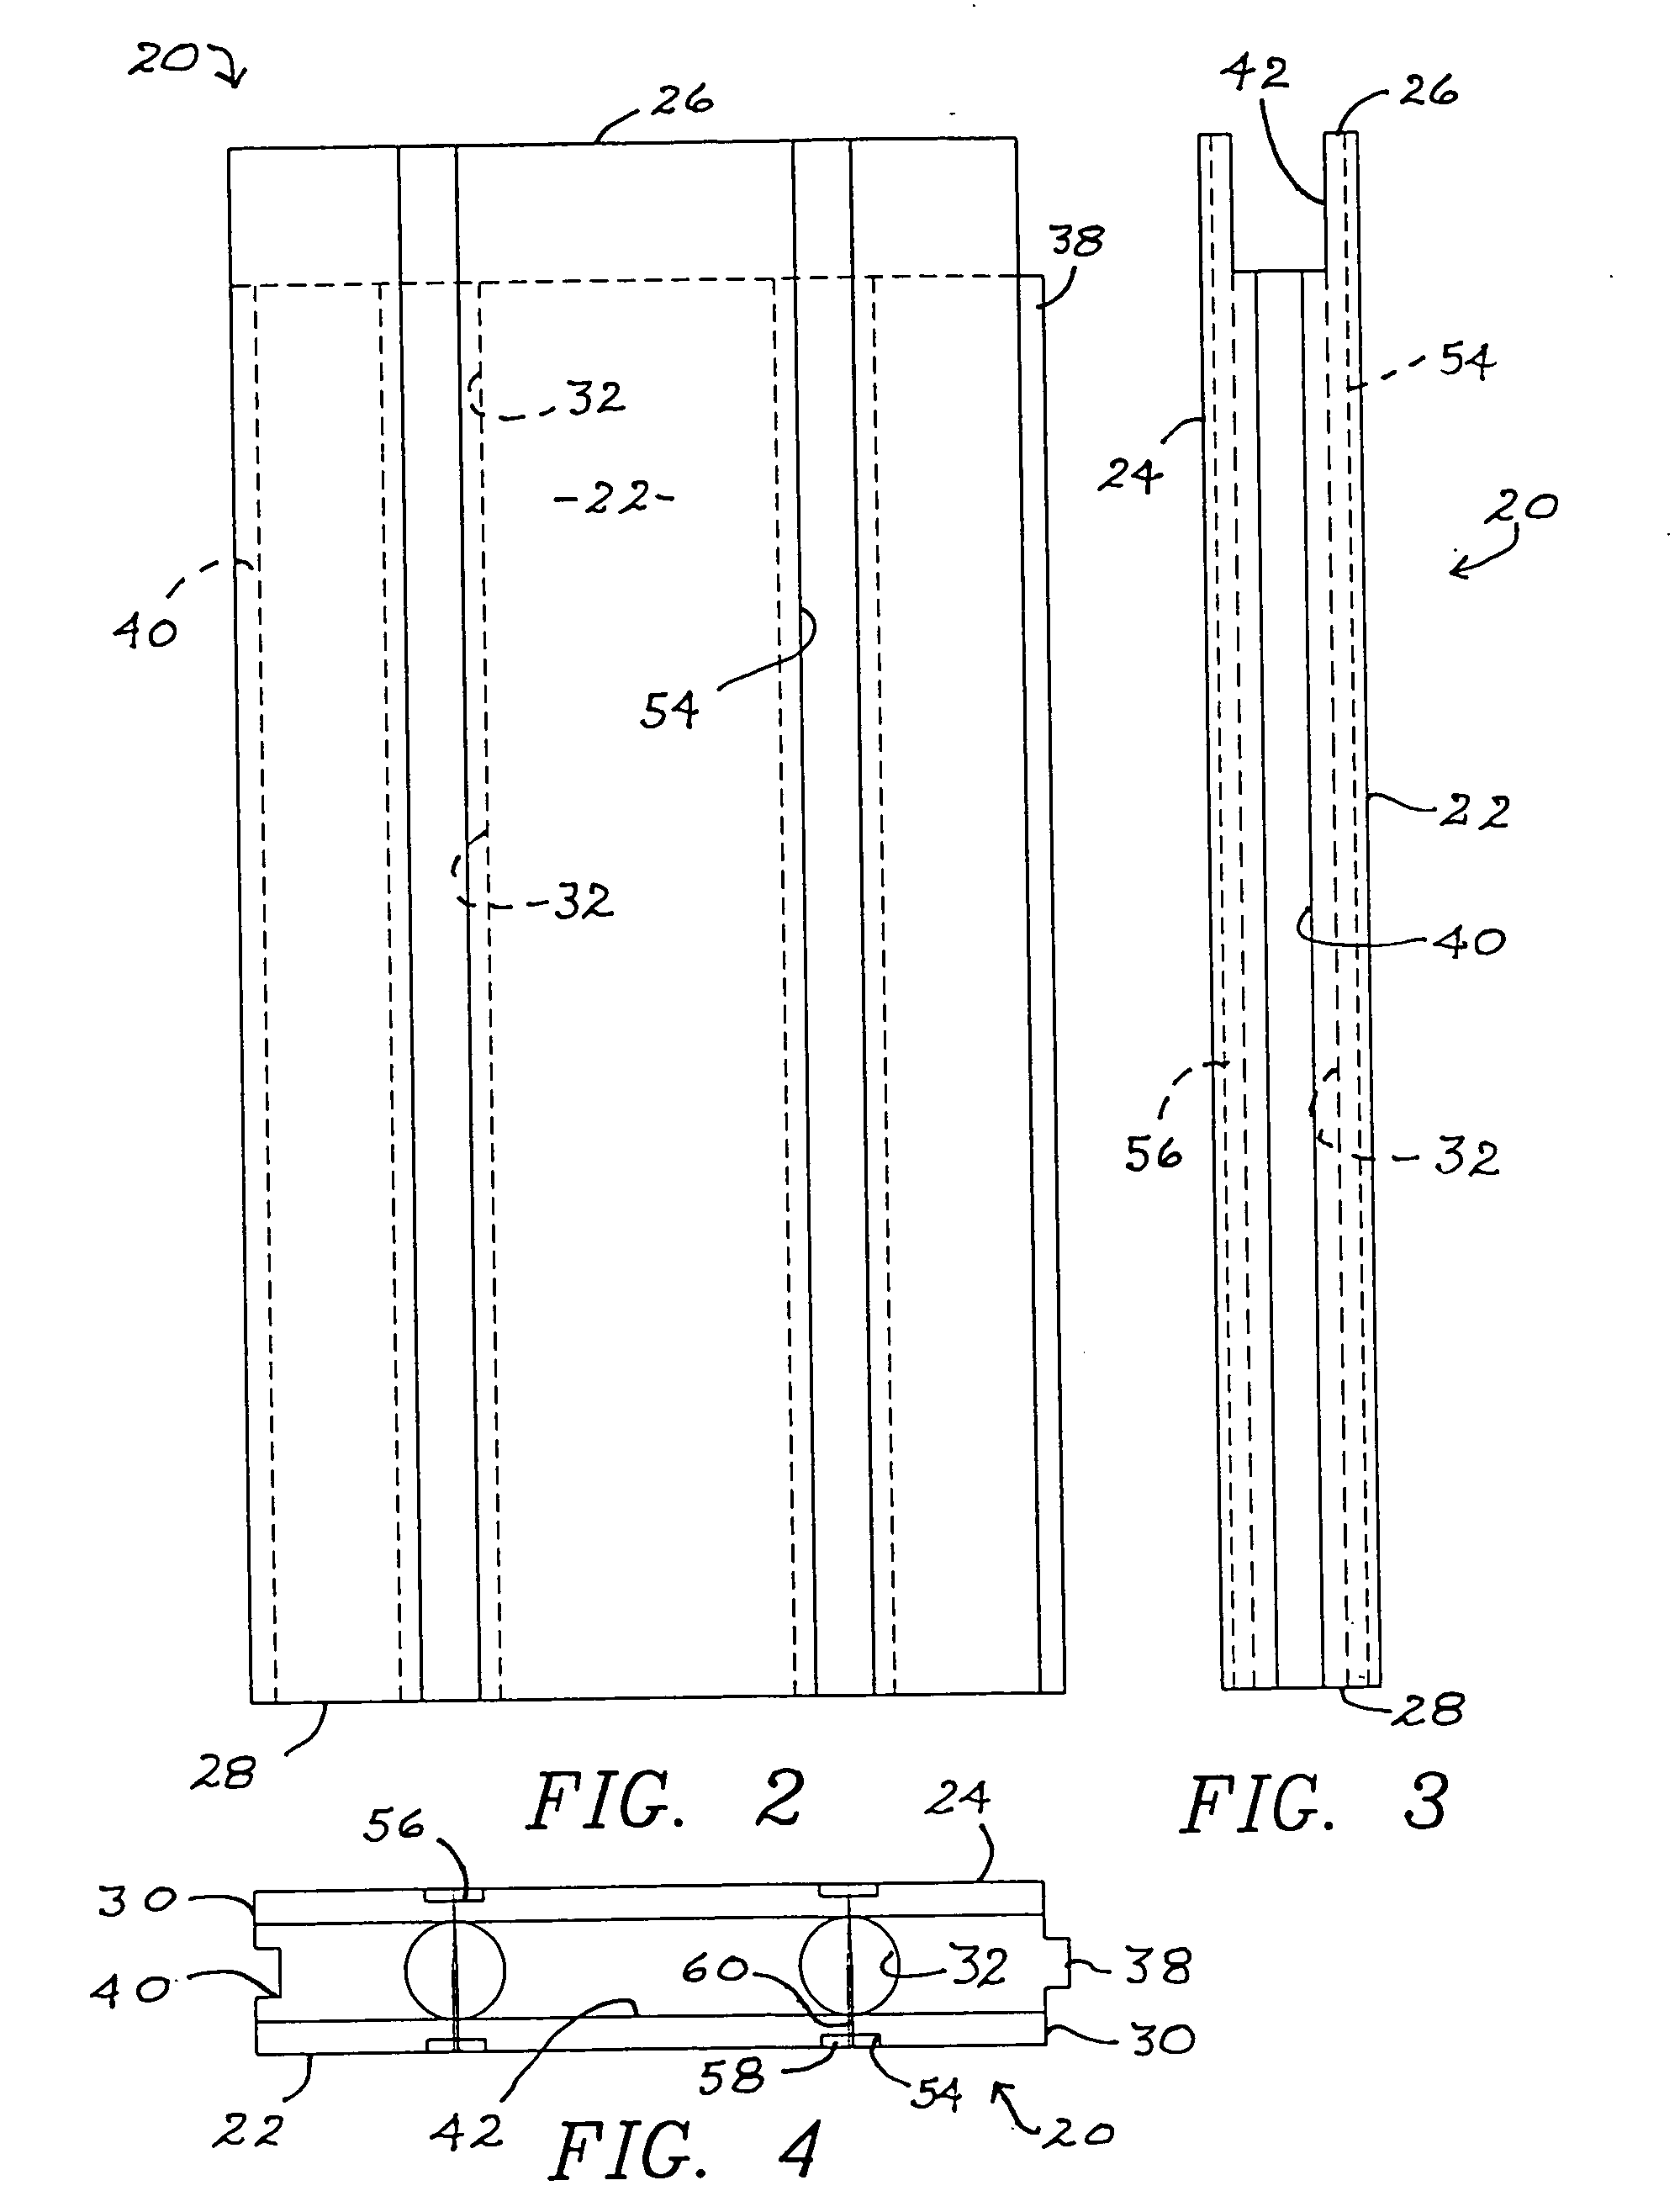 Insulated concrete form system